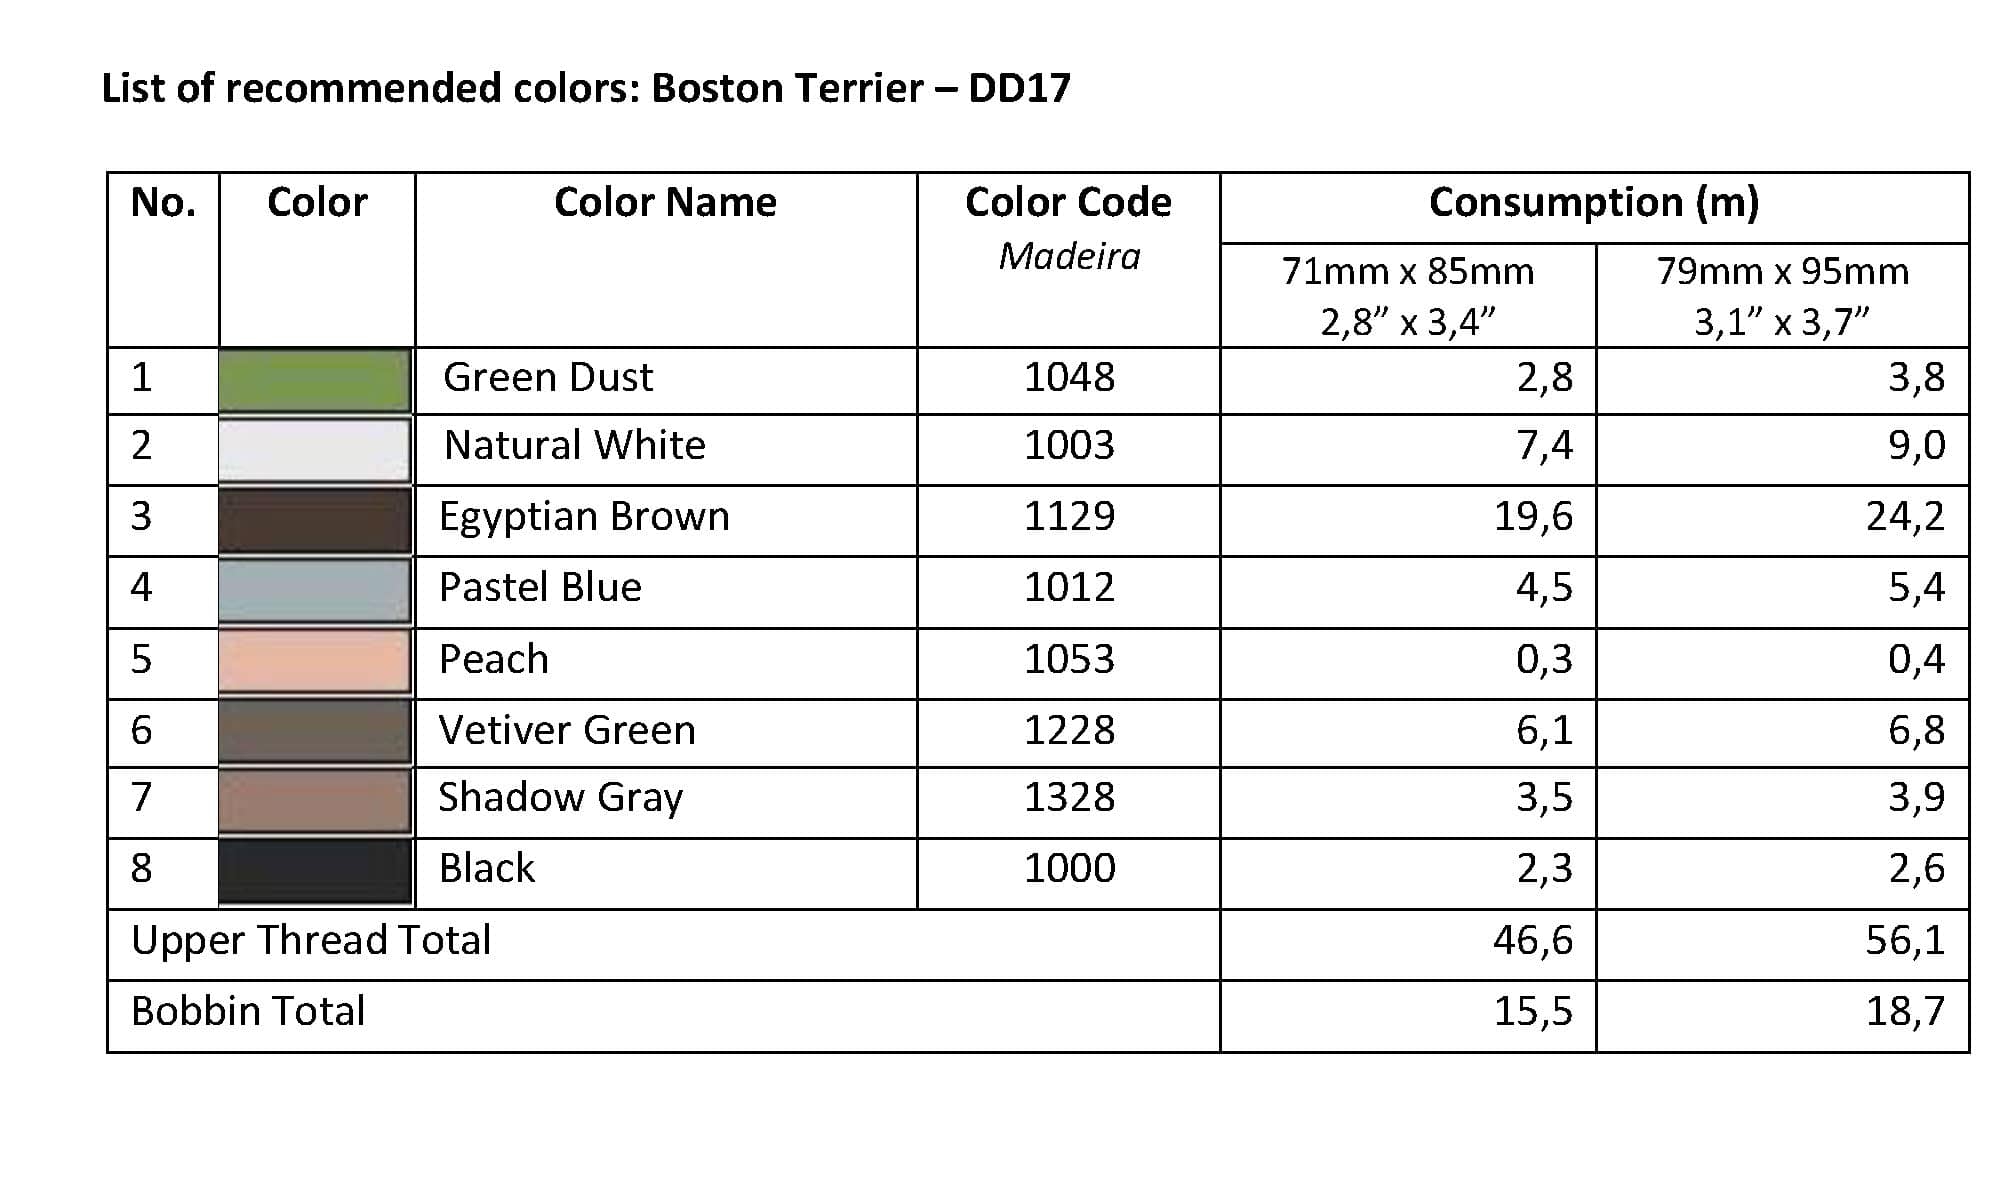 List of Recommended Colors - Boston Terrier DD17